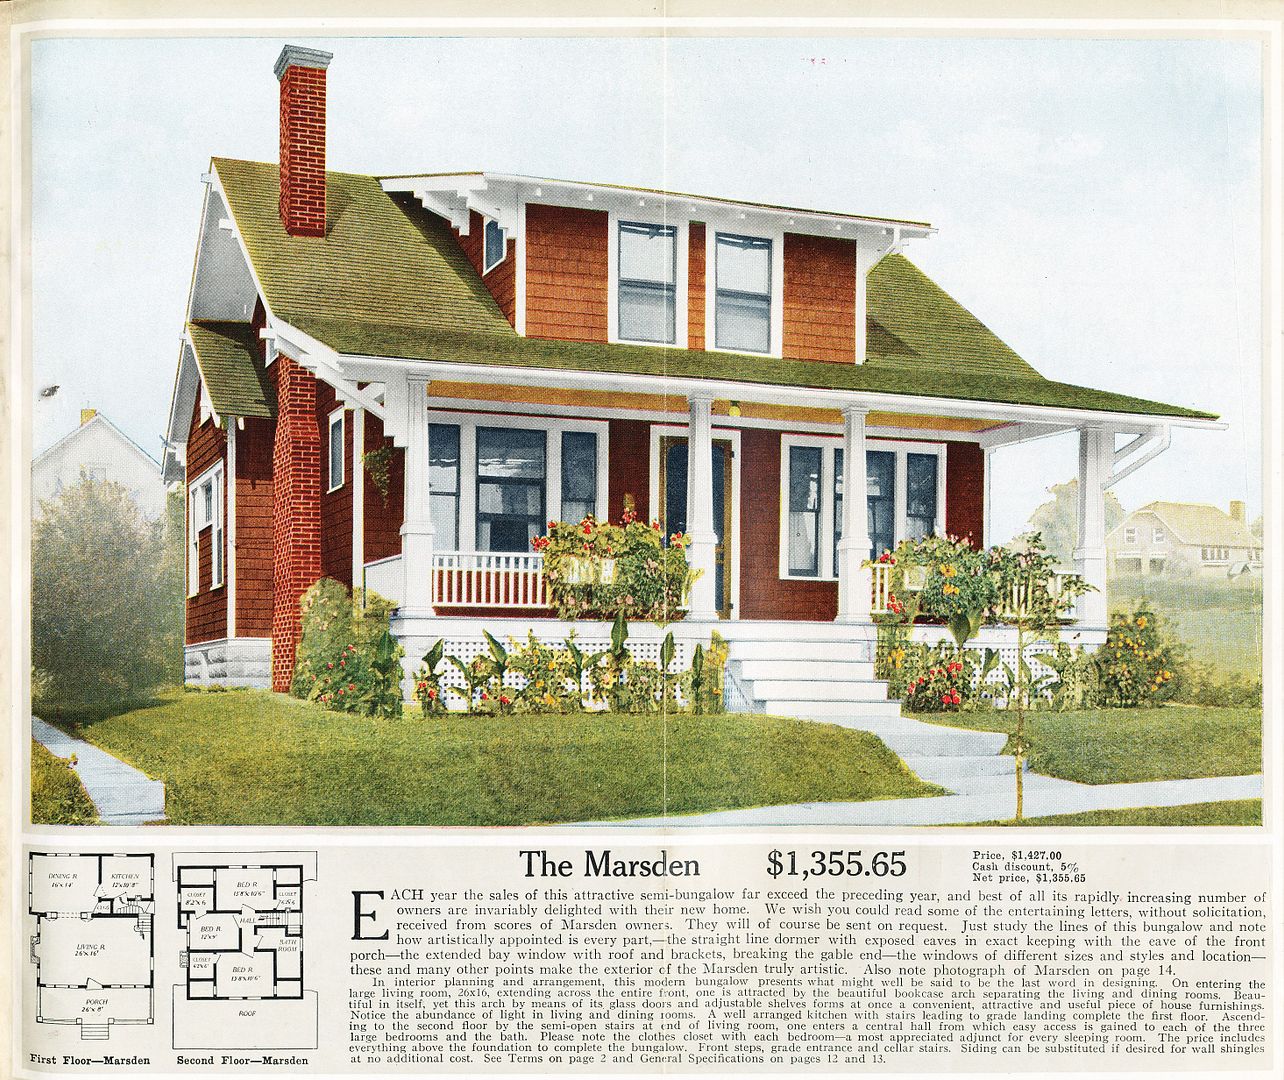 One of Aladdins best selling models was the Marsden (1916 catalog).